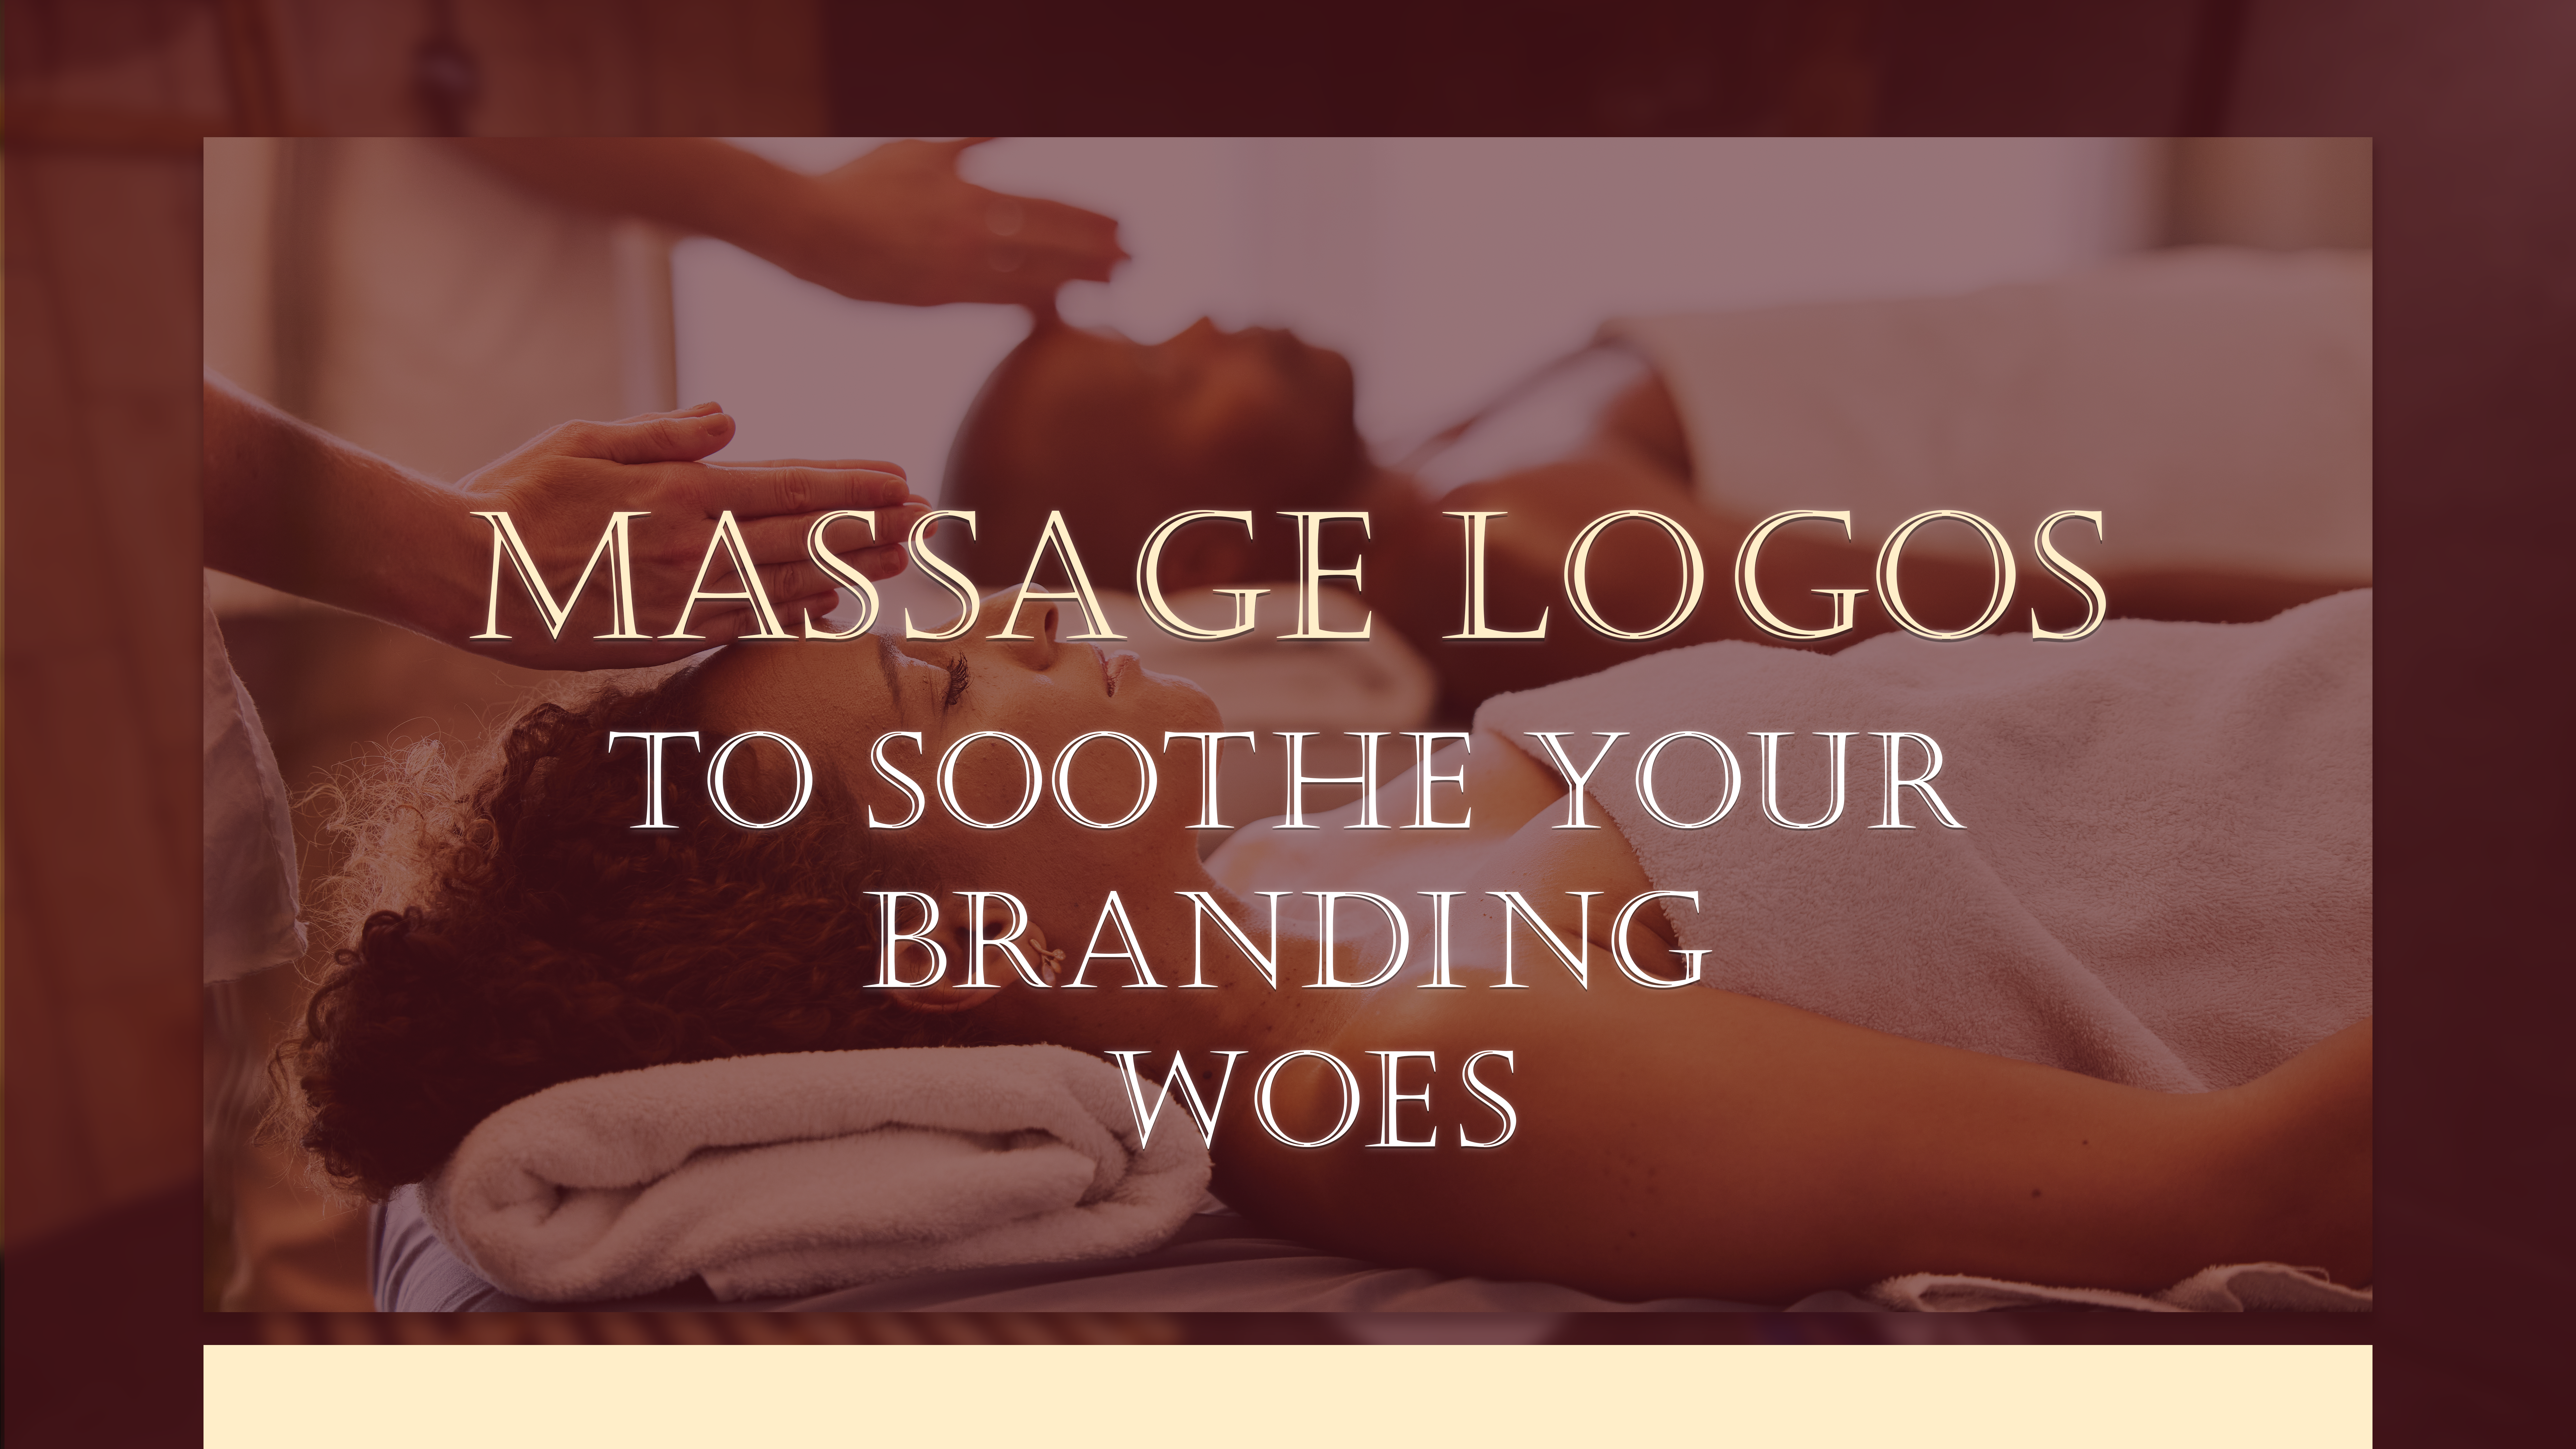 49 Massage Logos To Soothe Your Branding Woes blog thumbnail